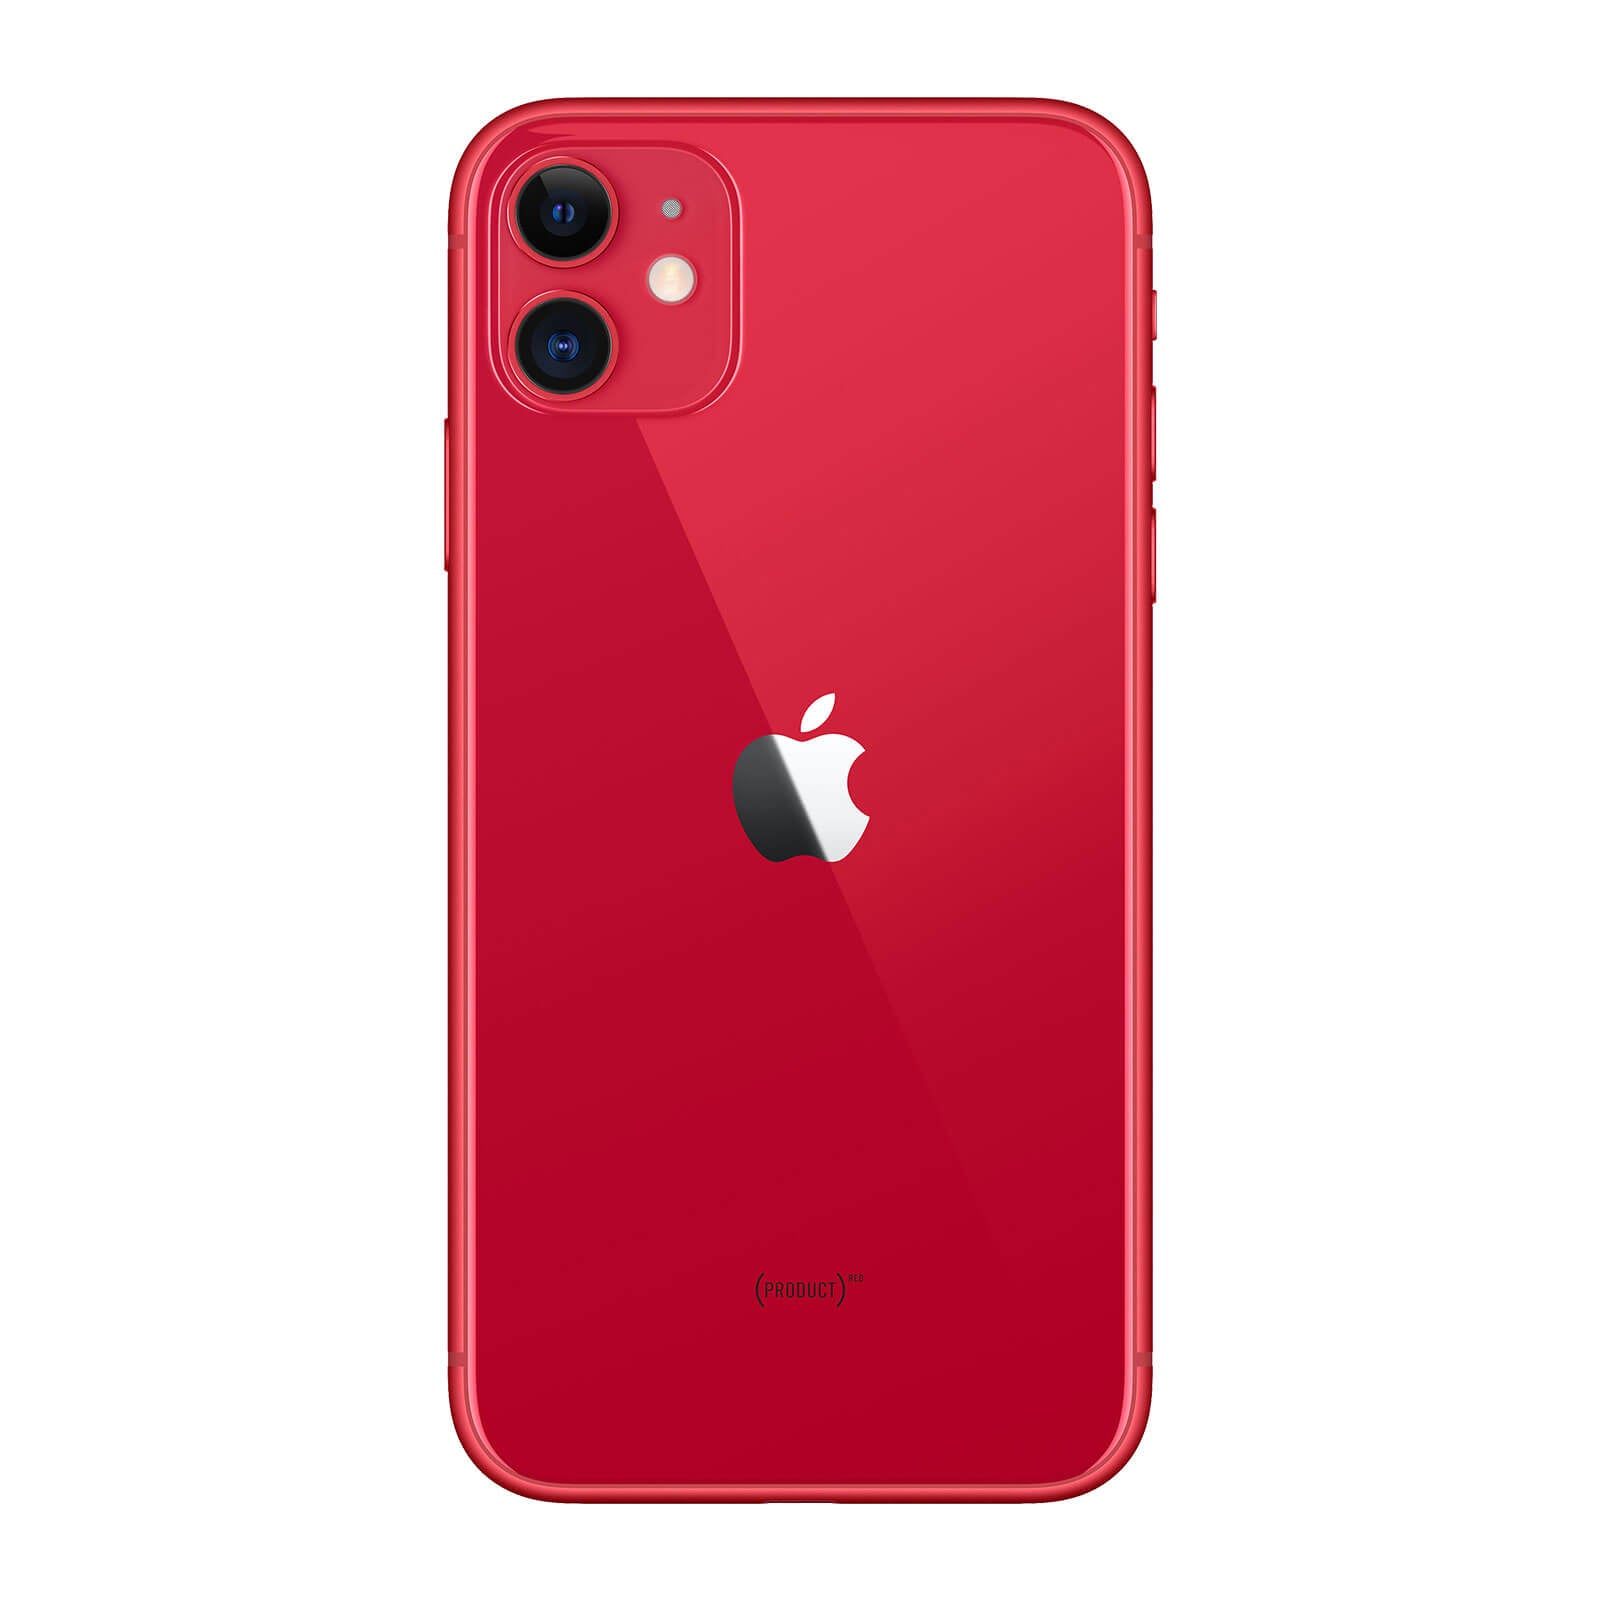 Apple iPhone 11 128GB Product Red Good - T-Mobile